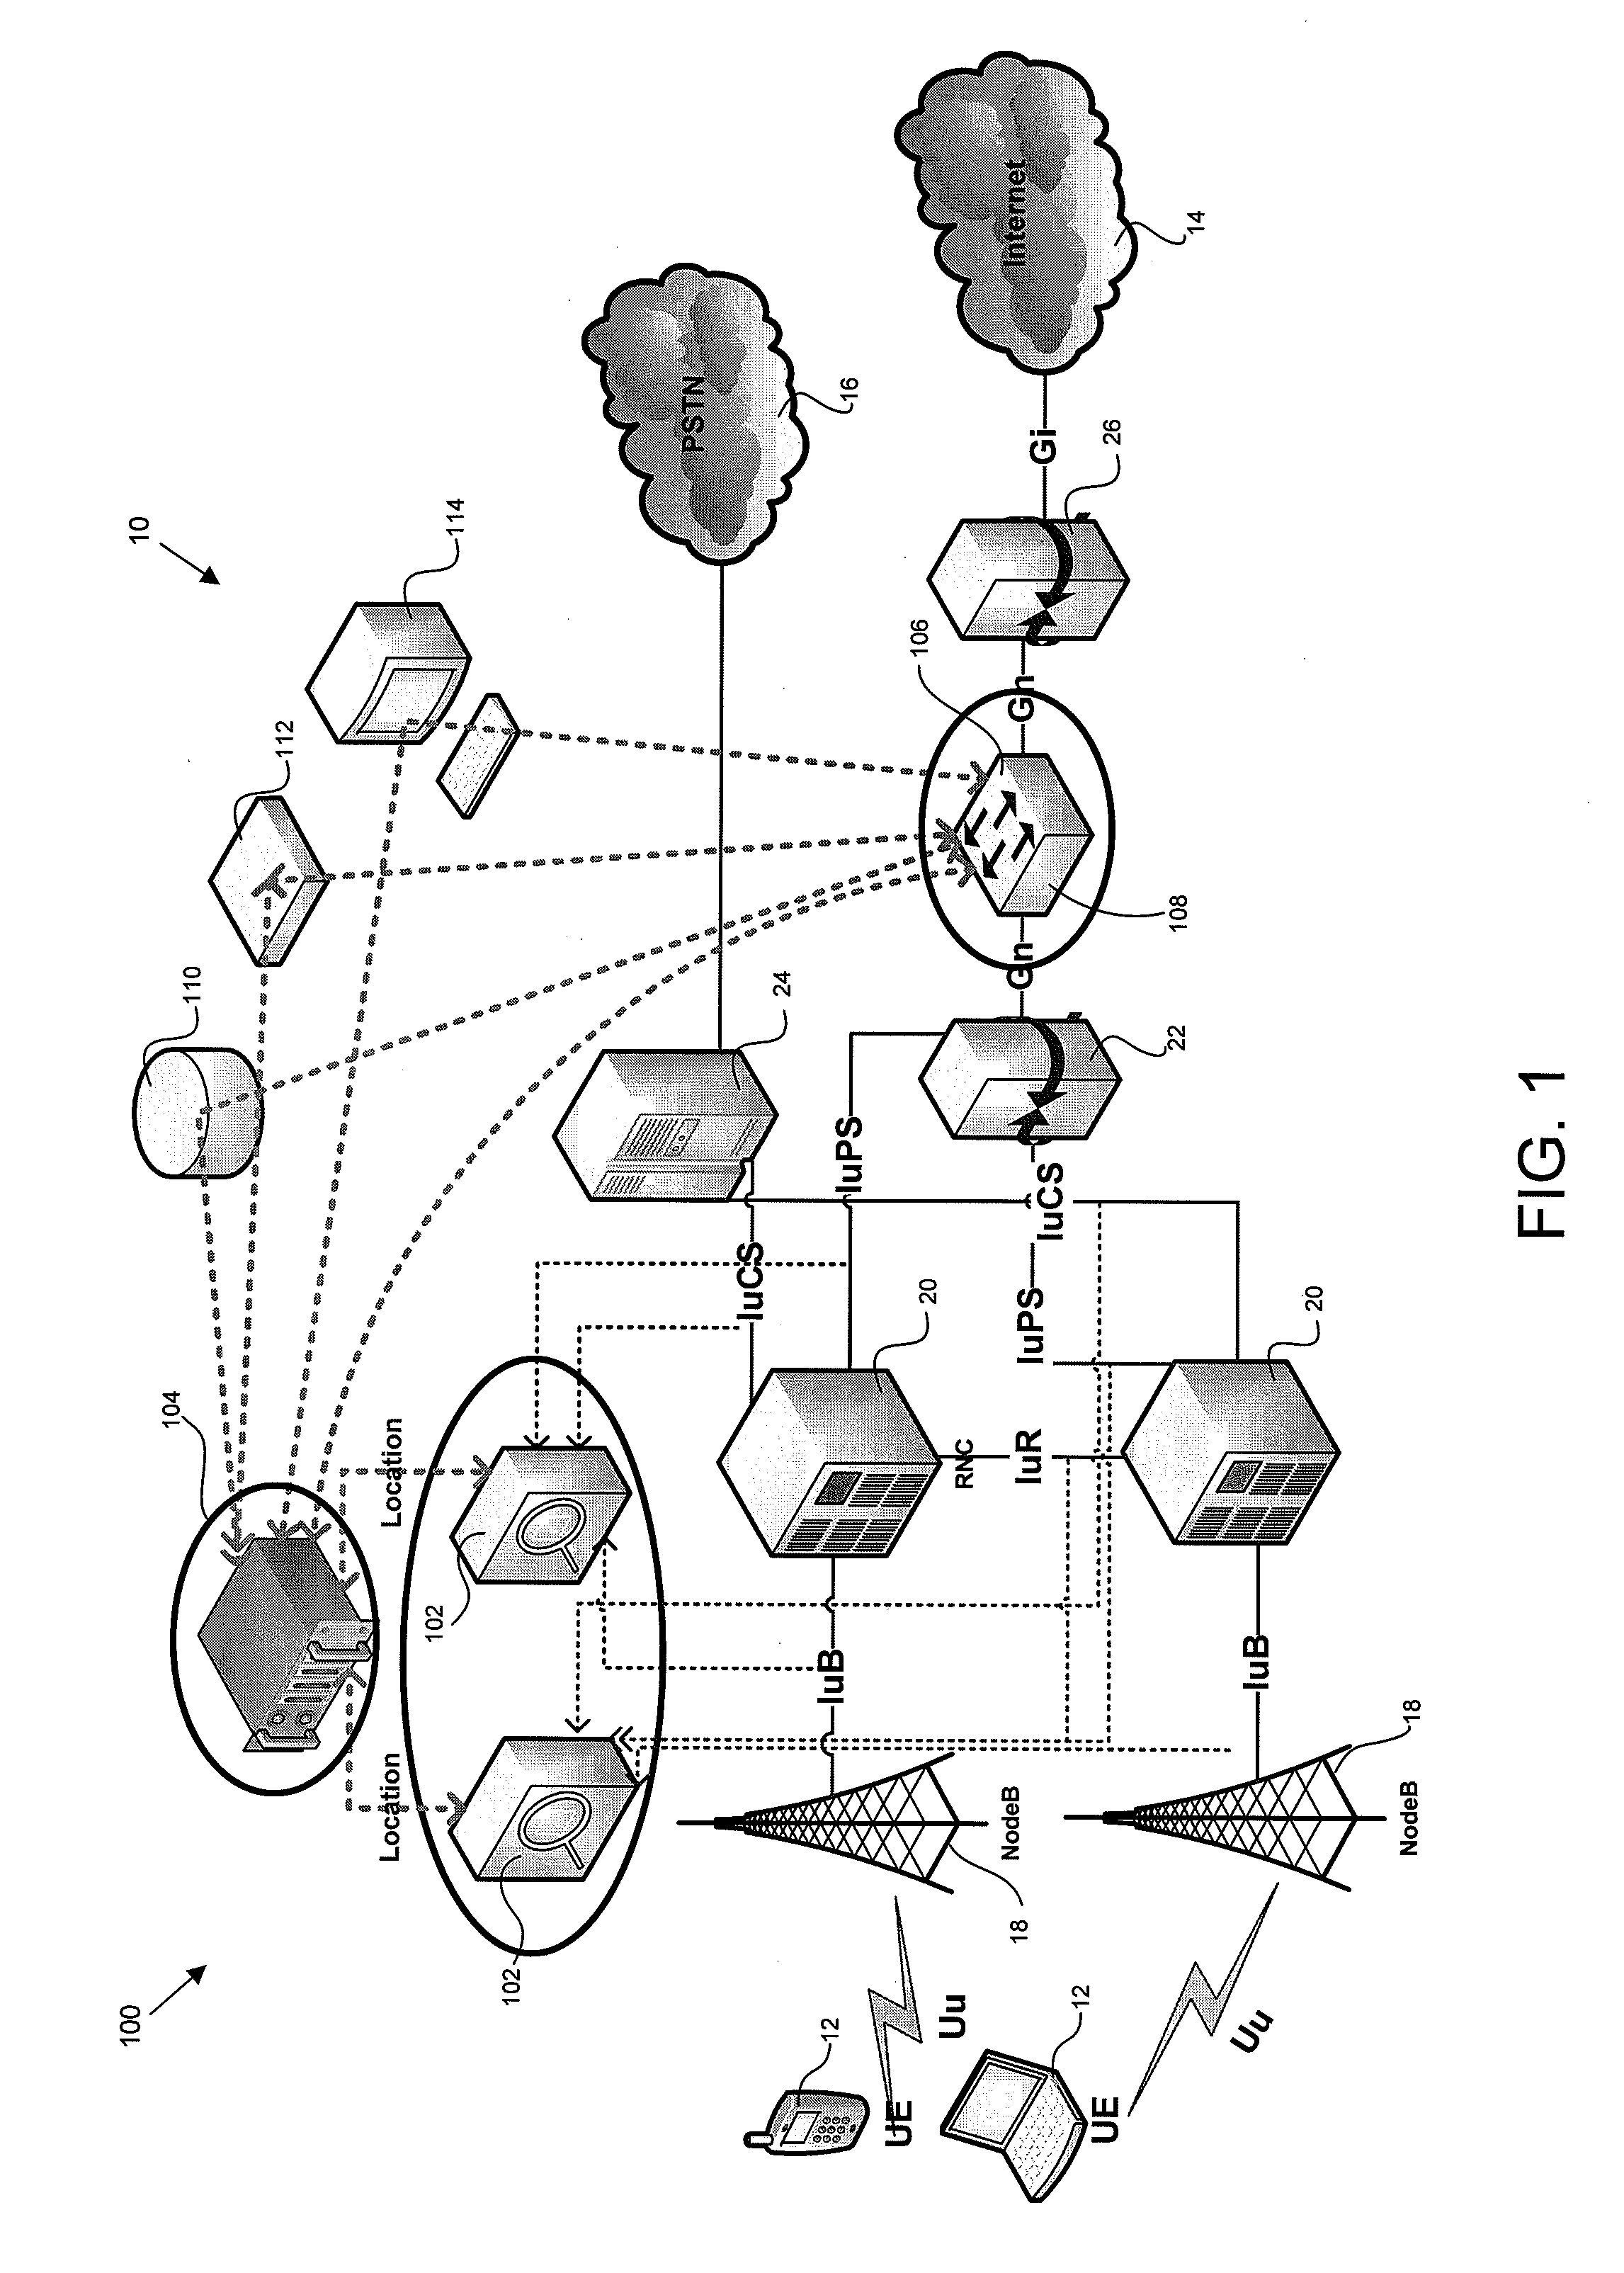 Methods and systems for network services related to geographic location